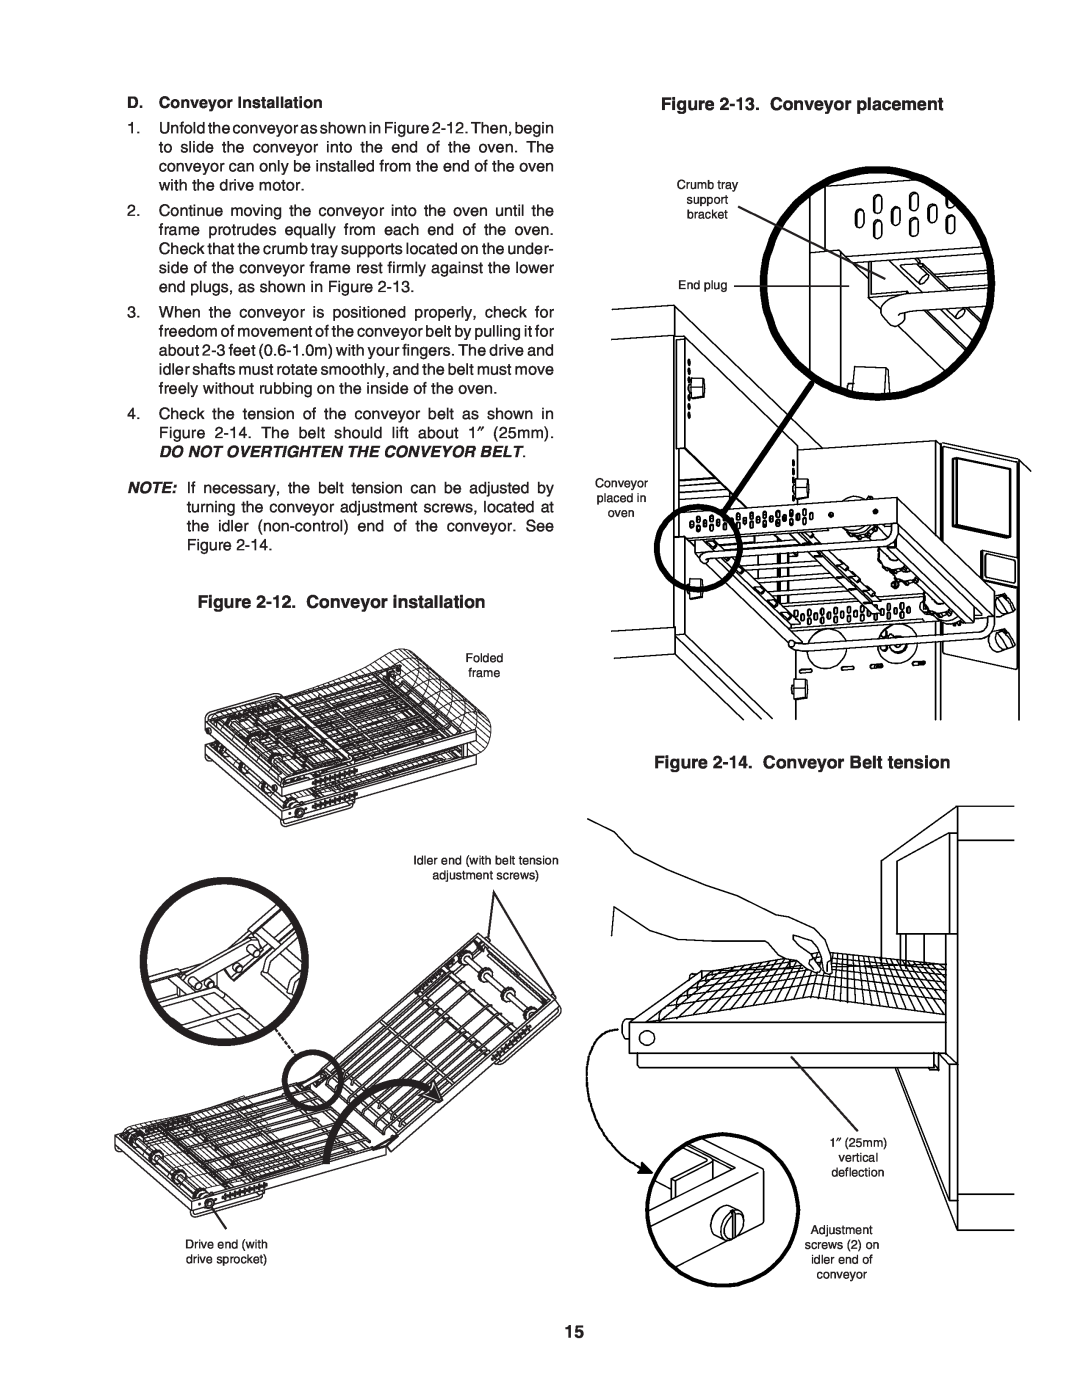 Middleby Marshall PS740E installation manual 12. Conveyor installation, 13. Conveyor placement, 14. Conveyor Belt tension 